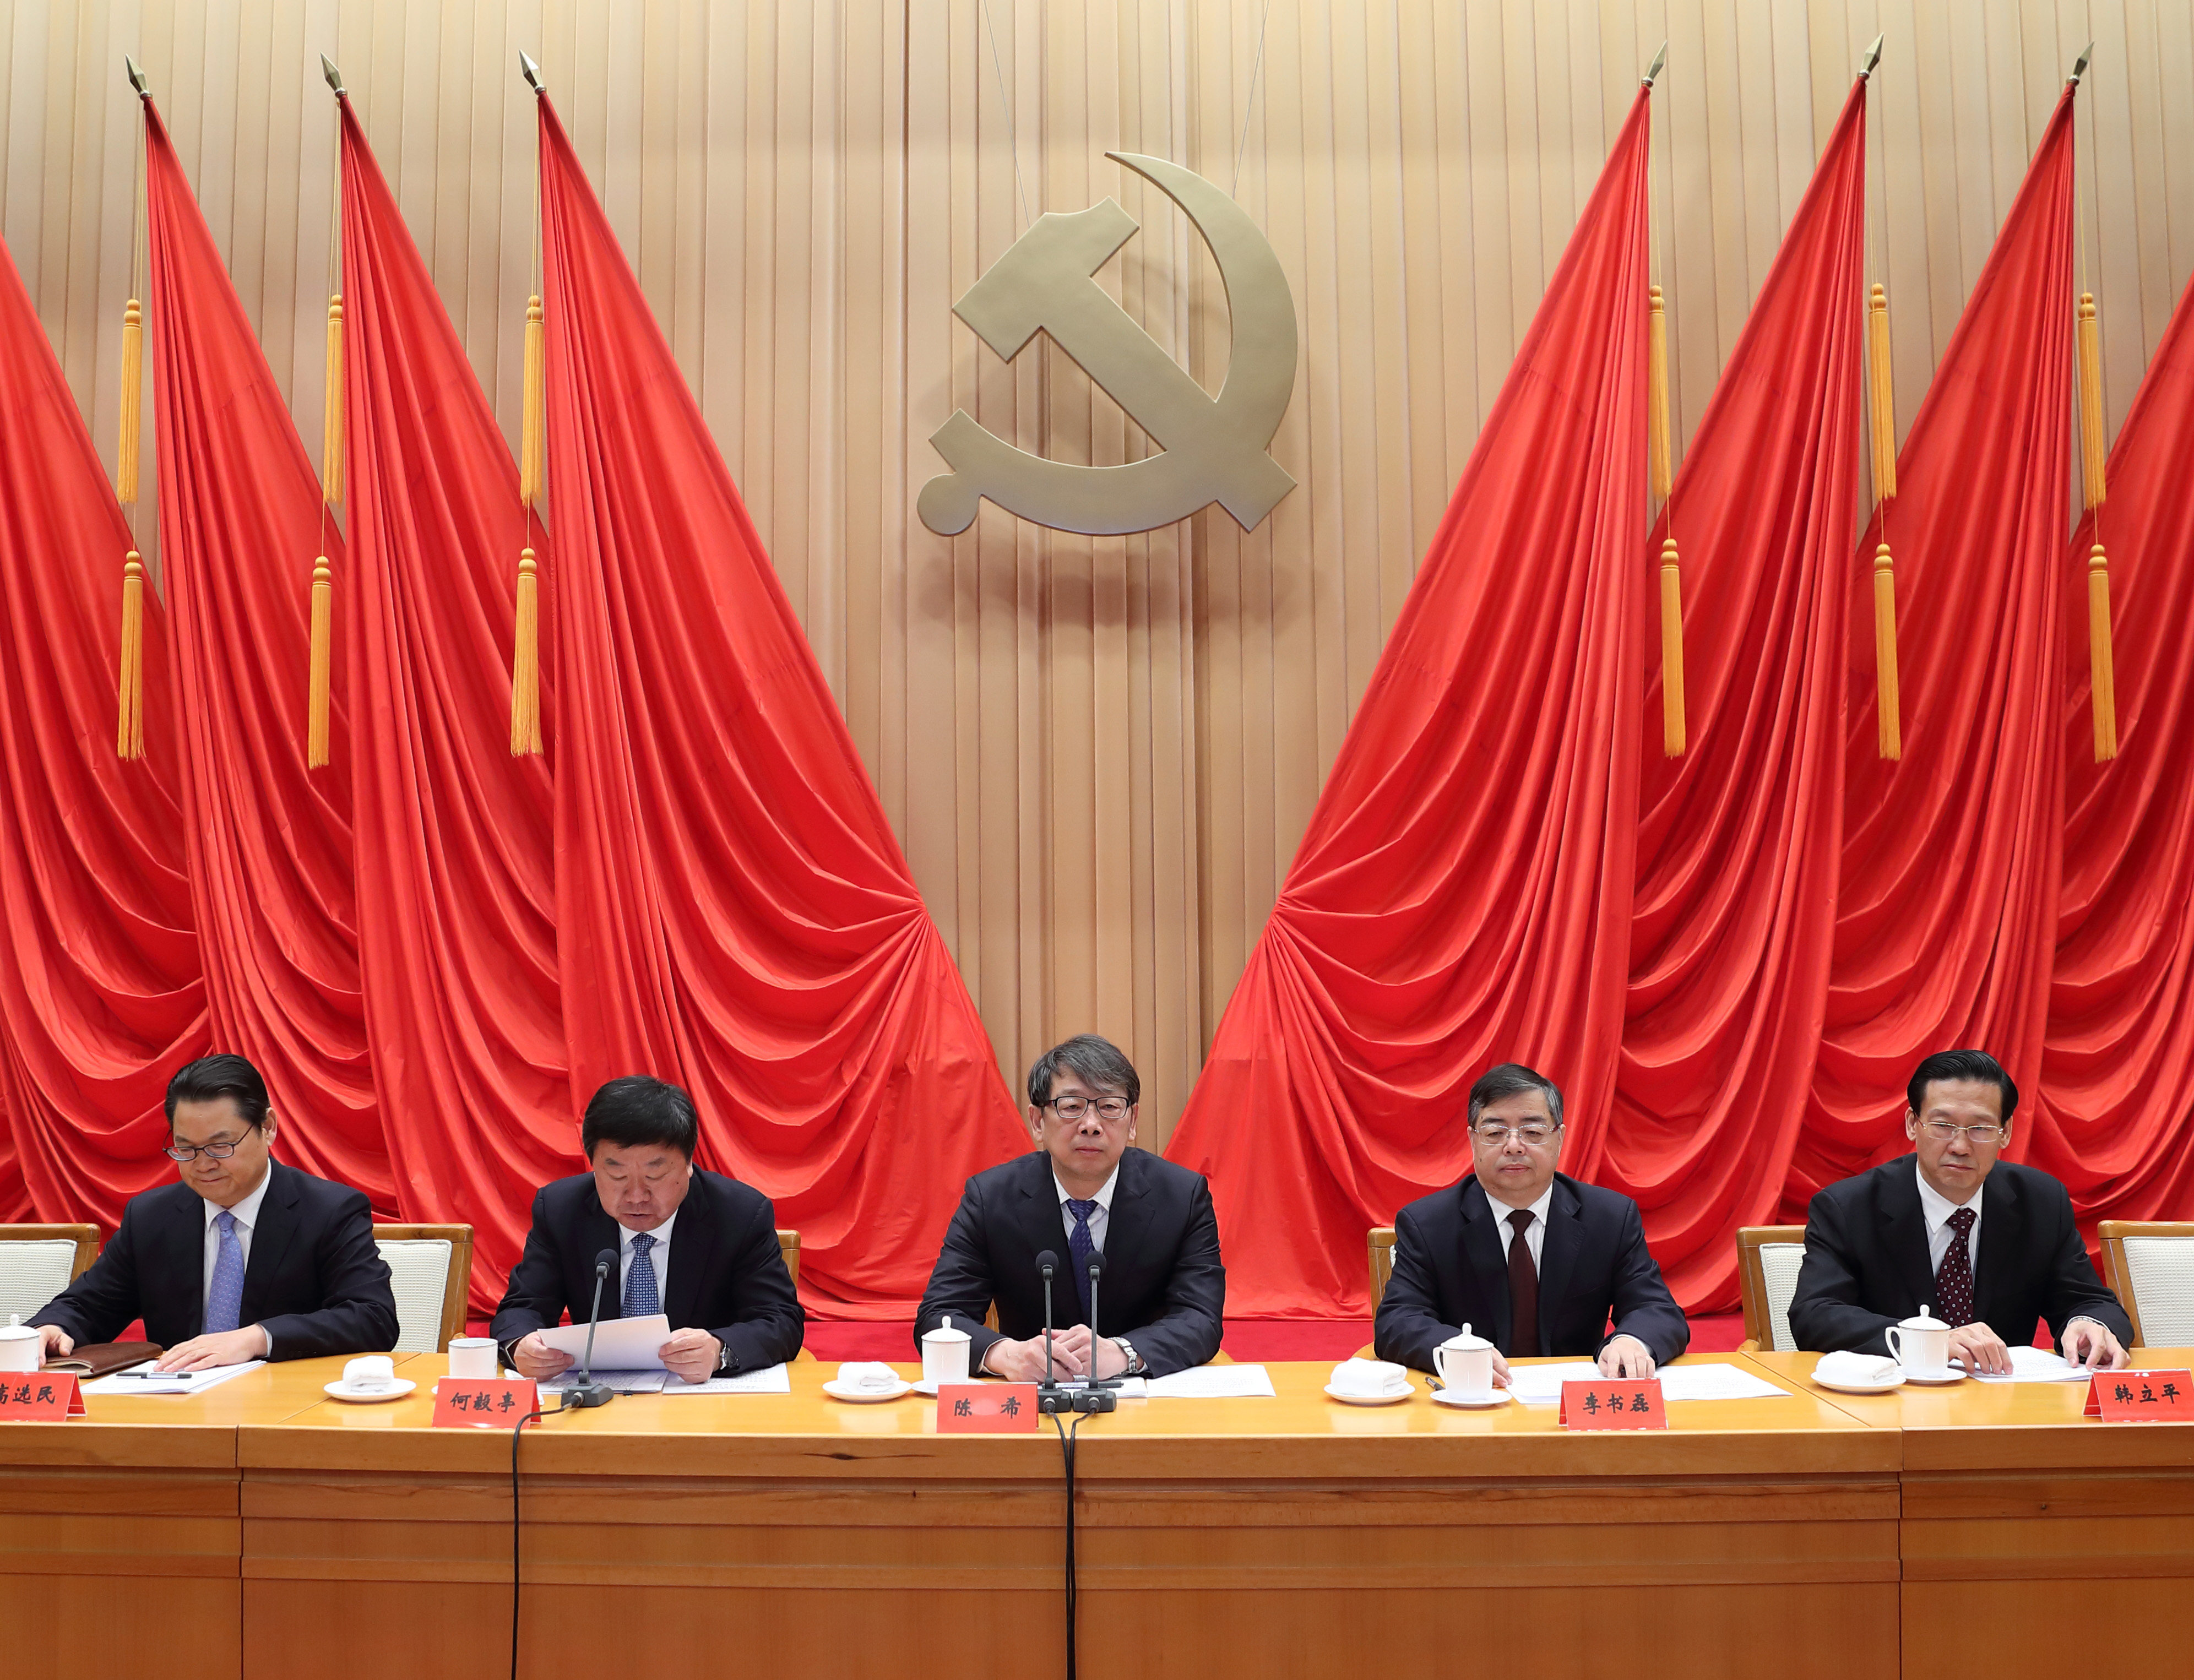 Chen Xi (centre) spent three decades at Tsinghua University, mainly responsible for Communist Party work. Photo: Xinhua